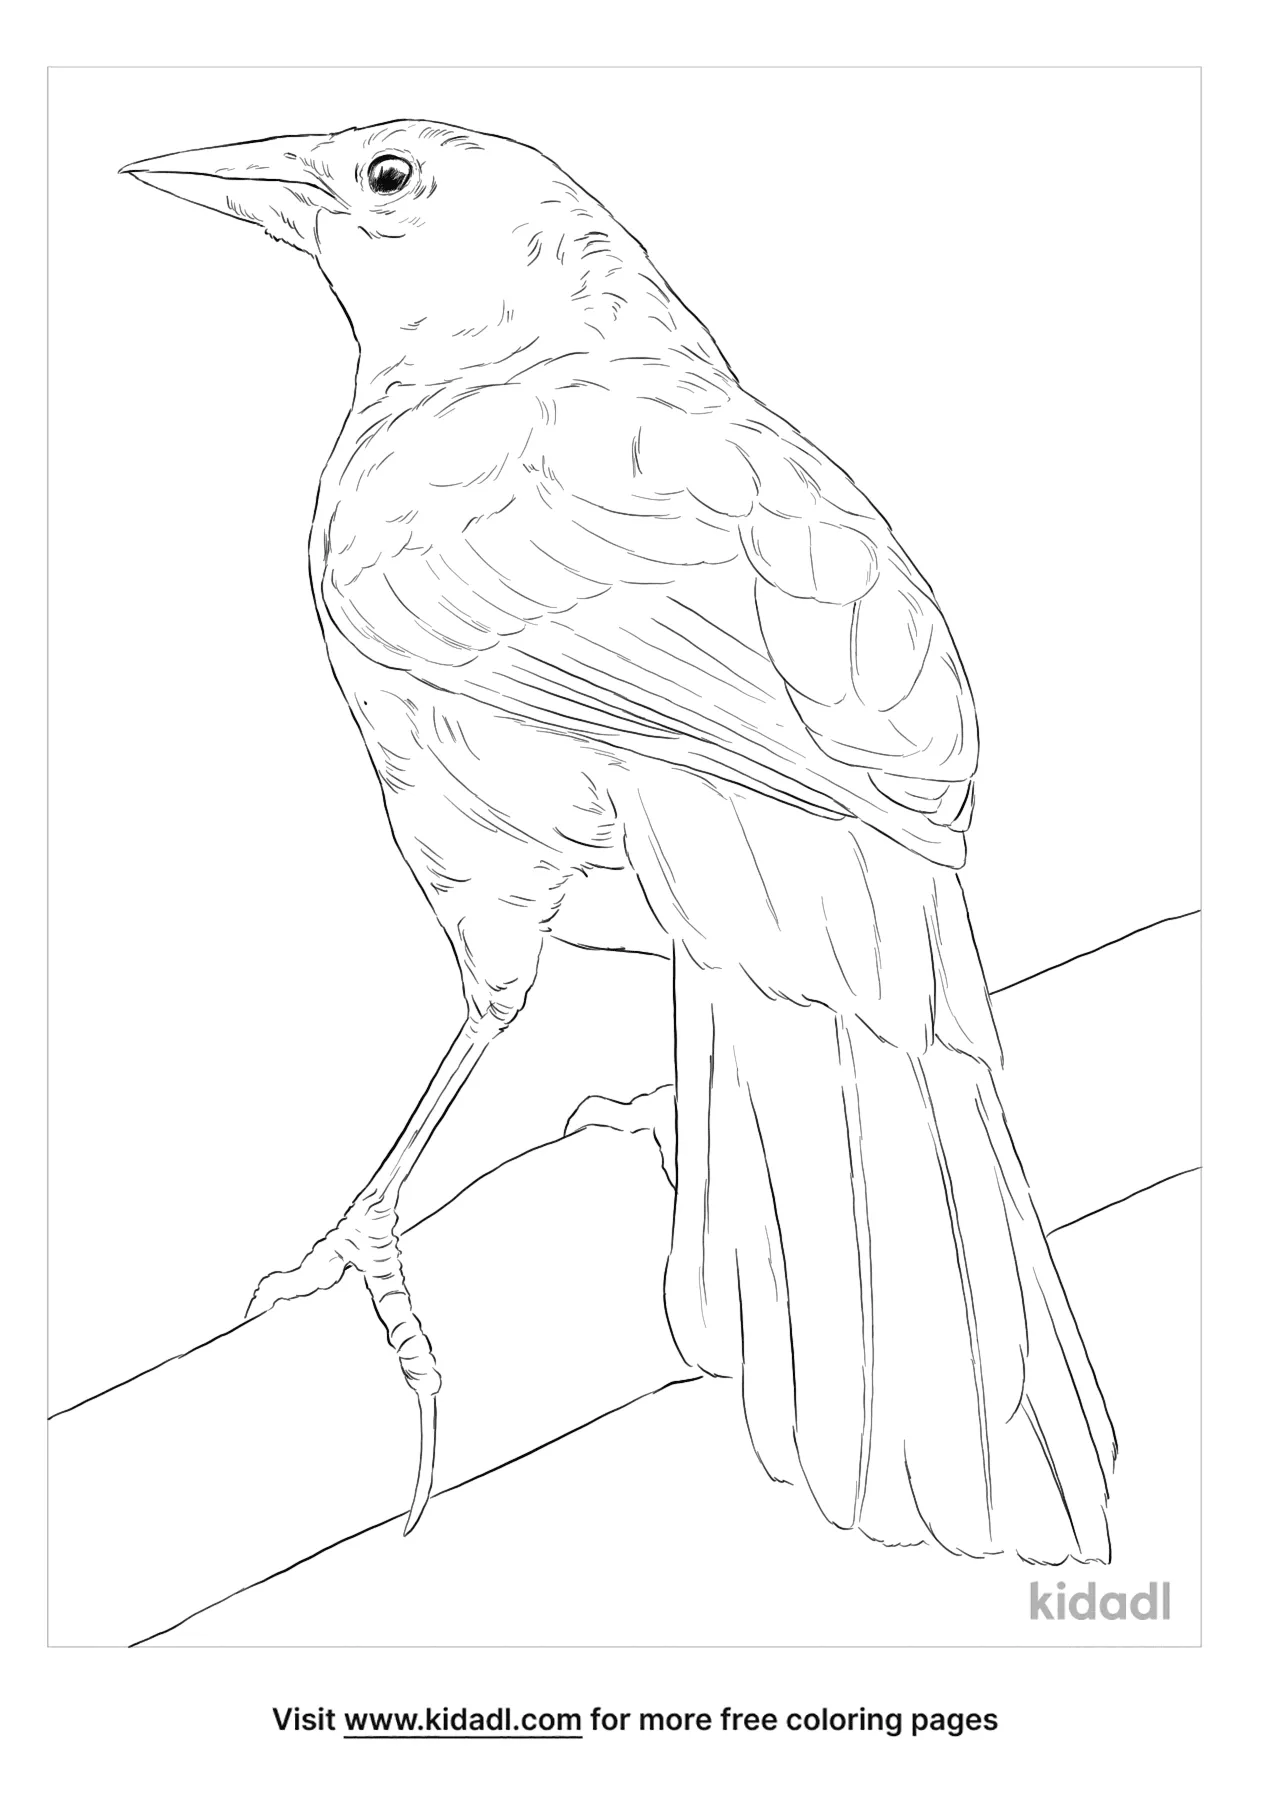 Melodious Blackbird Coloring Page